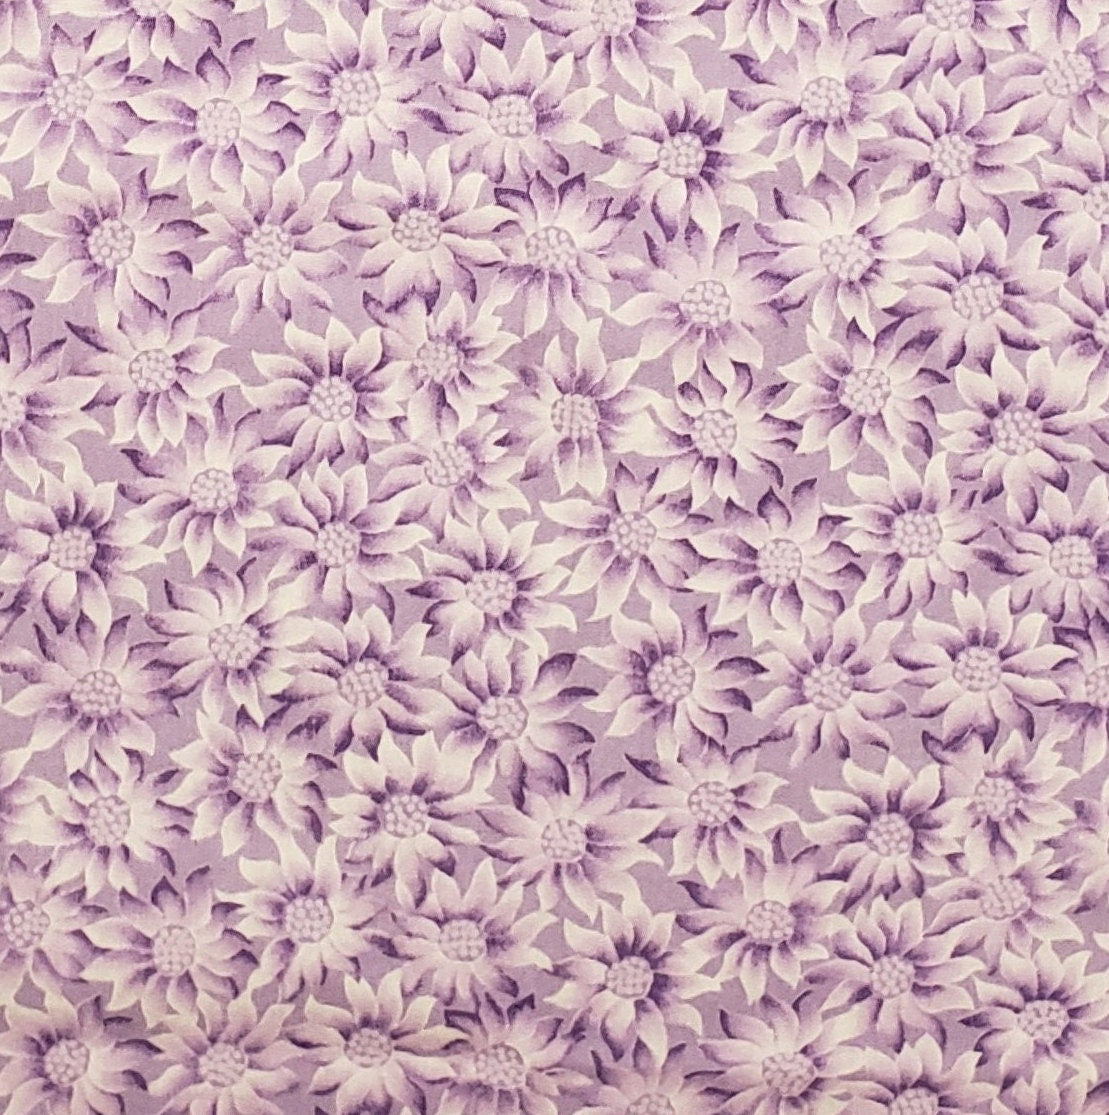 Galaxy Garden by Jason Yenter for In the Beginning Fabrics 2000 - Lavender Fabric with Tone-on-Tone Flower Print